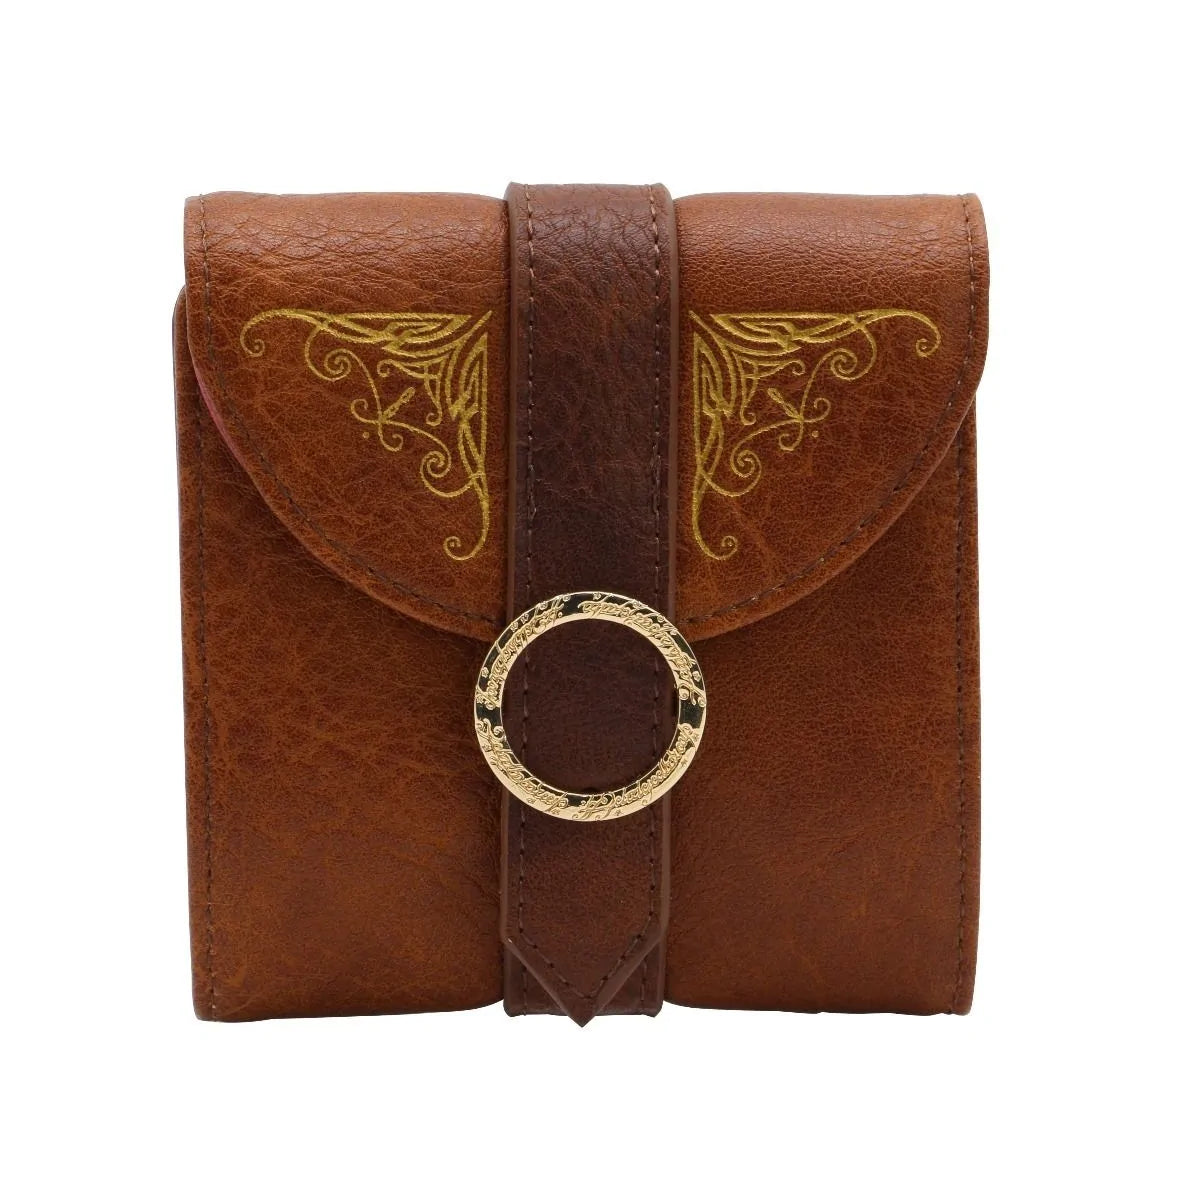 Lord Of The Rings: One Ring Premium Wallet